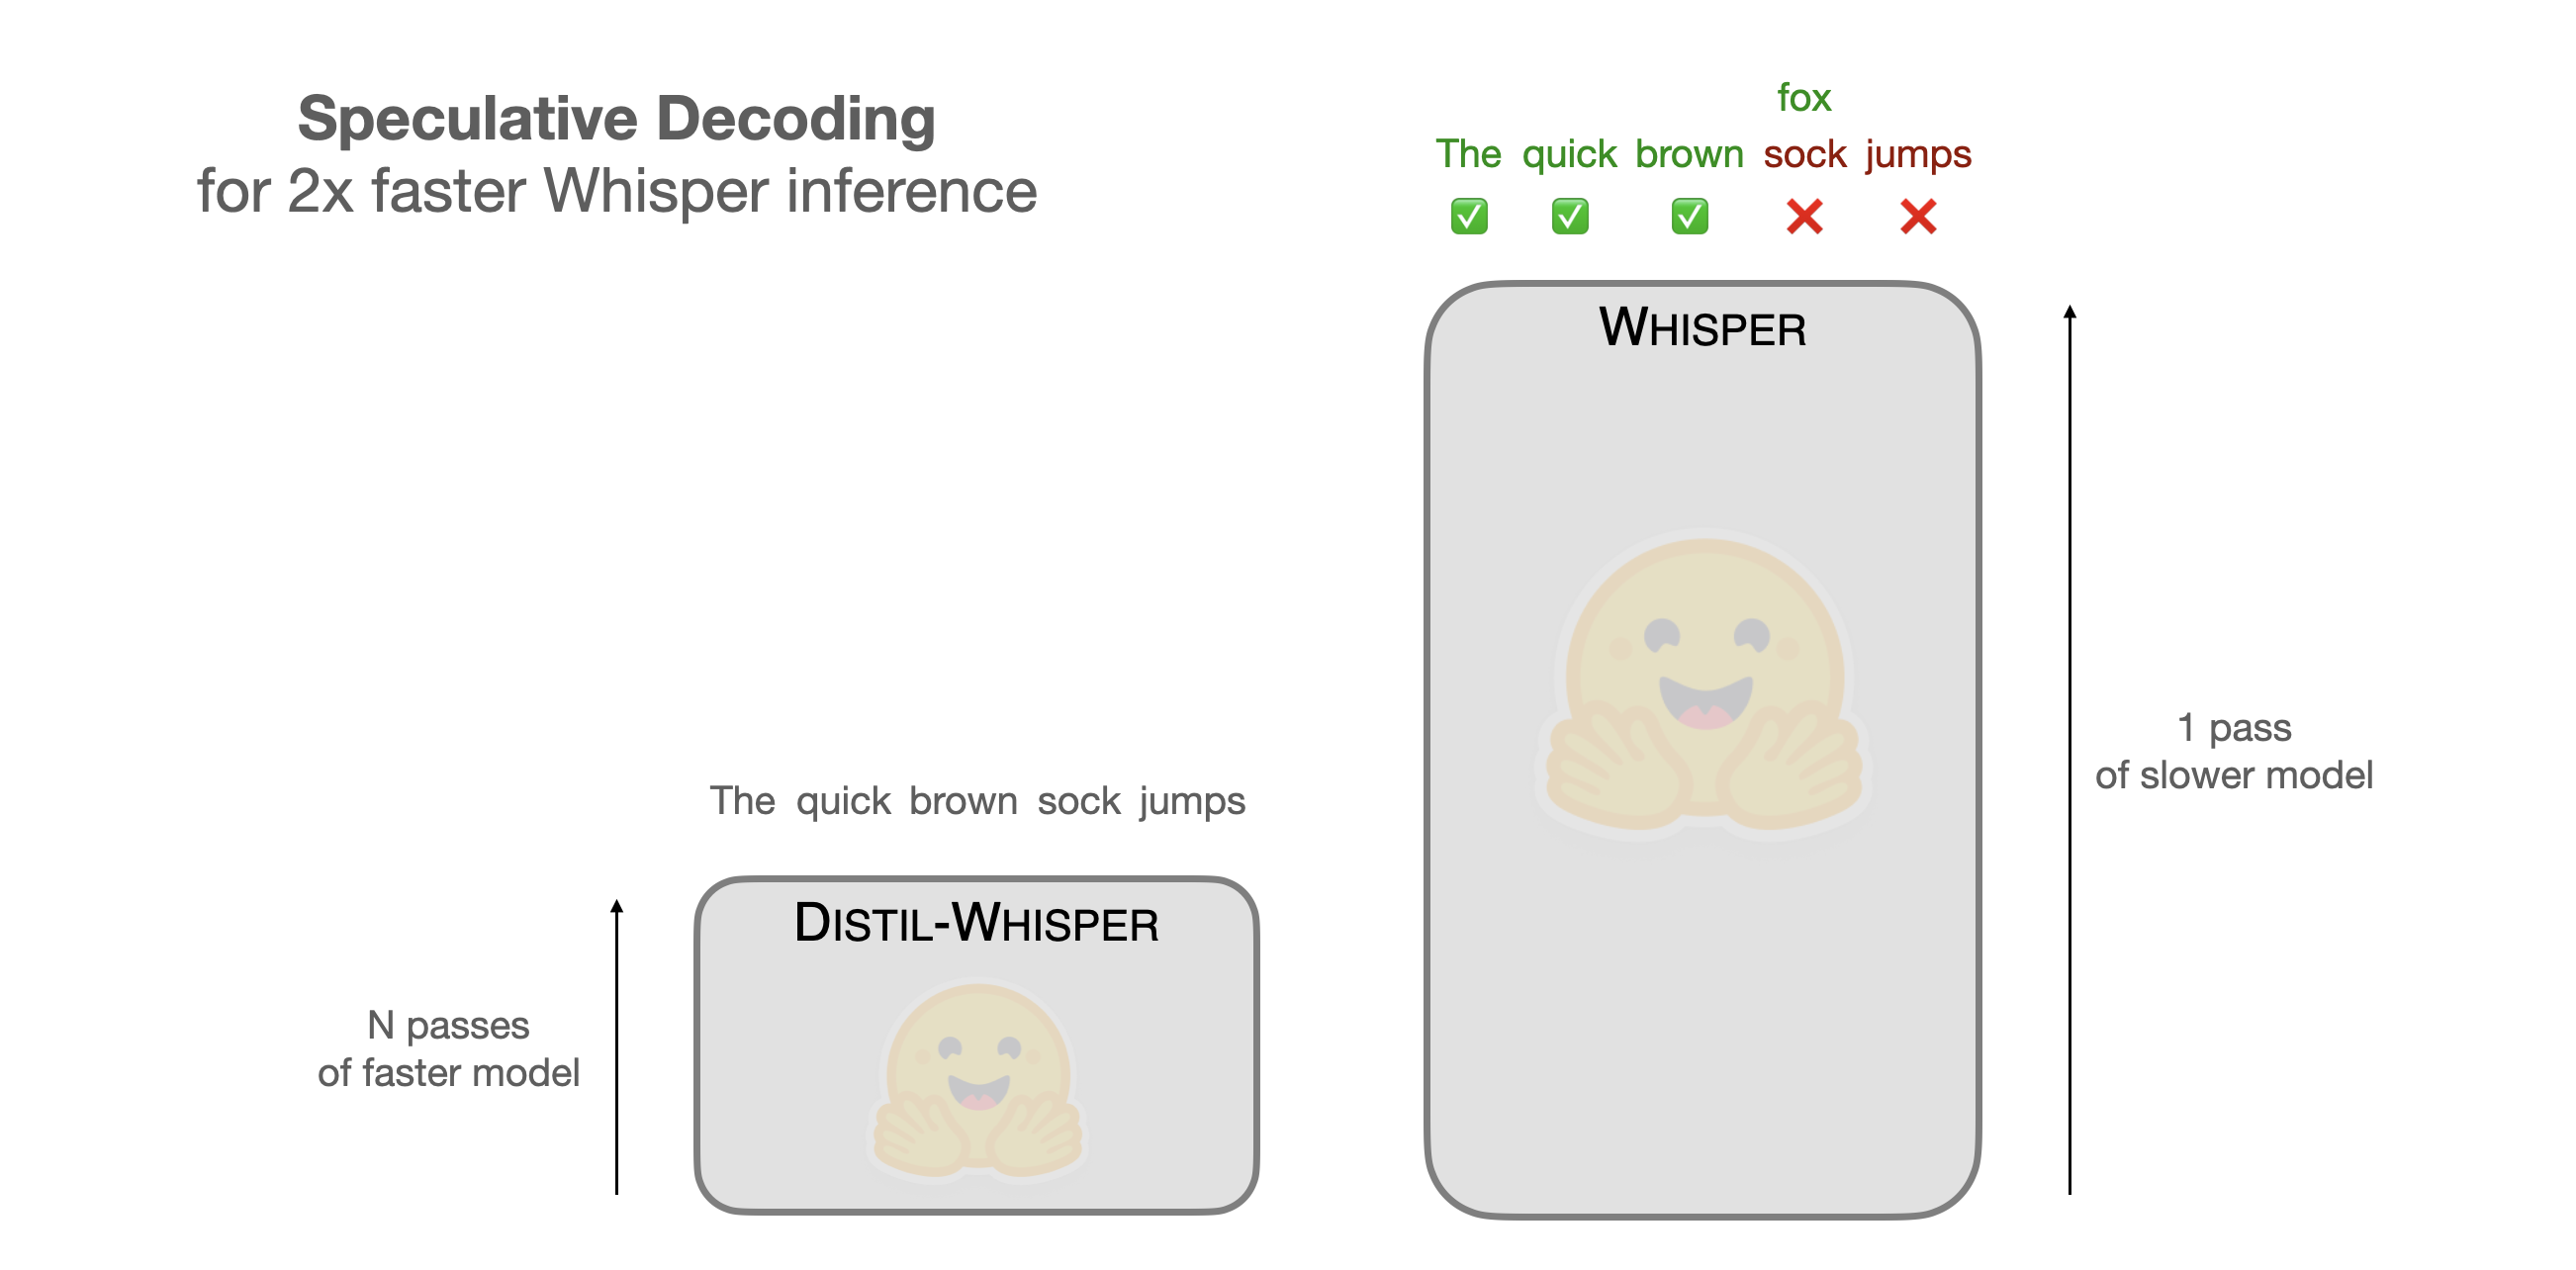 Speculative Decoding for 2x Faster Whisper Inference